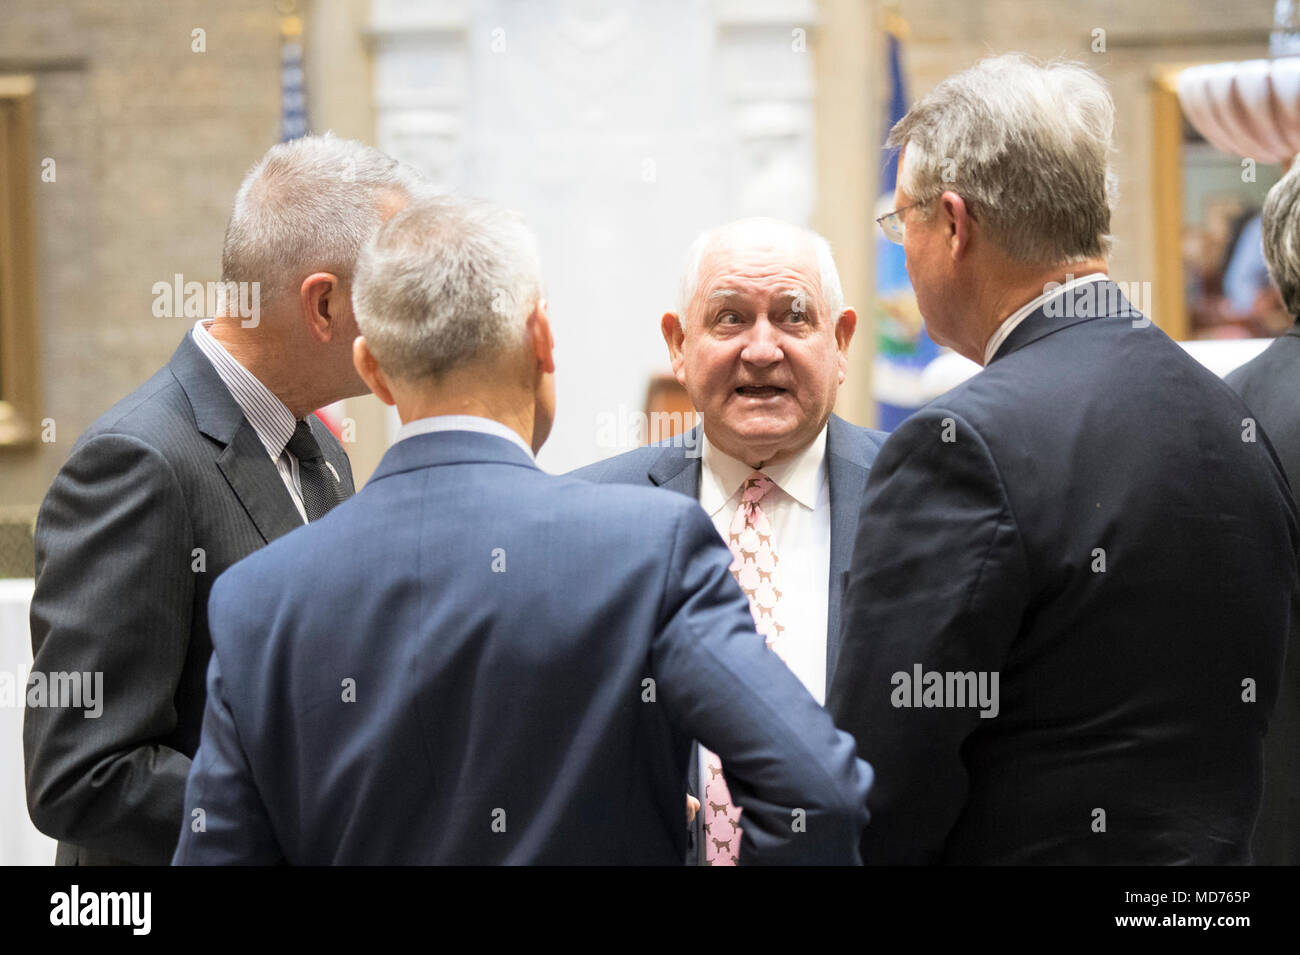 Agriculture Secretary Sonny Perdue along with USDA's leadership meets and greets representatives from the House Ag Committee at the USDA in Washington, DC on March 15, 2018. Stock Photo